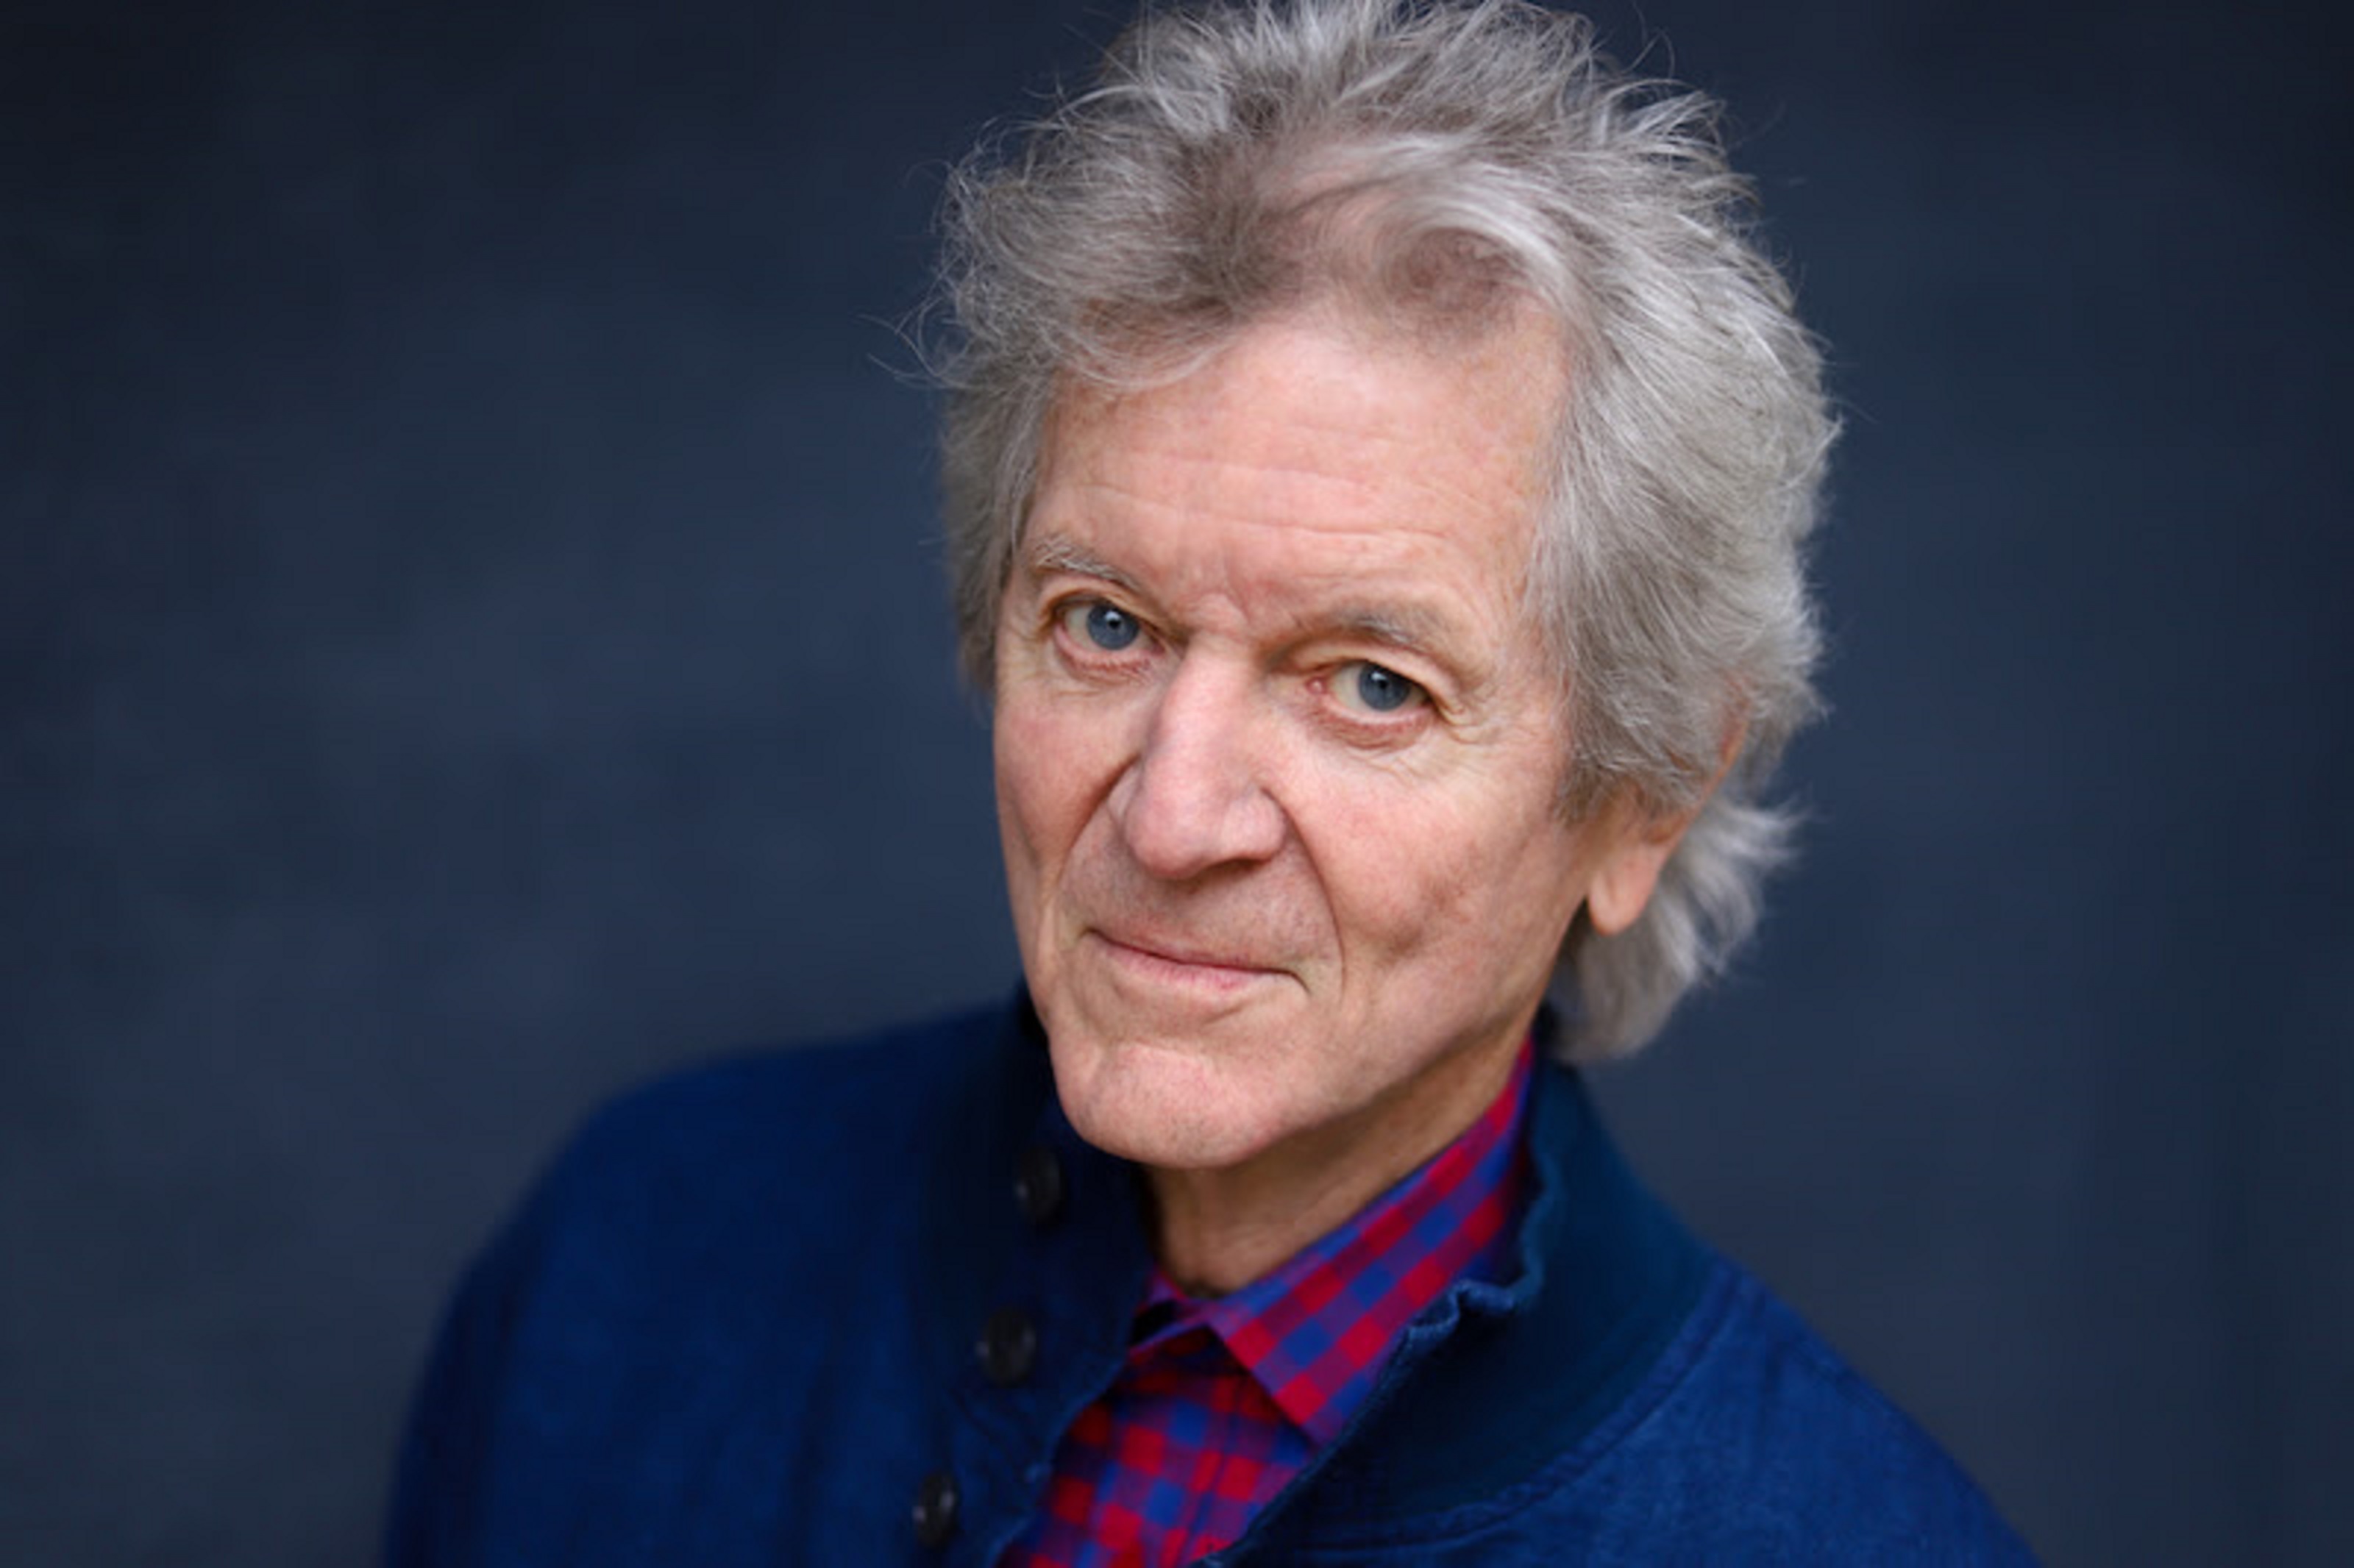 Rodney Crowell To Release "The Chicago Sessions" - Produced By Jeff Tweedy